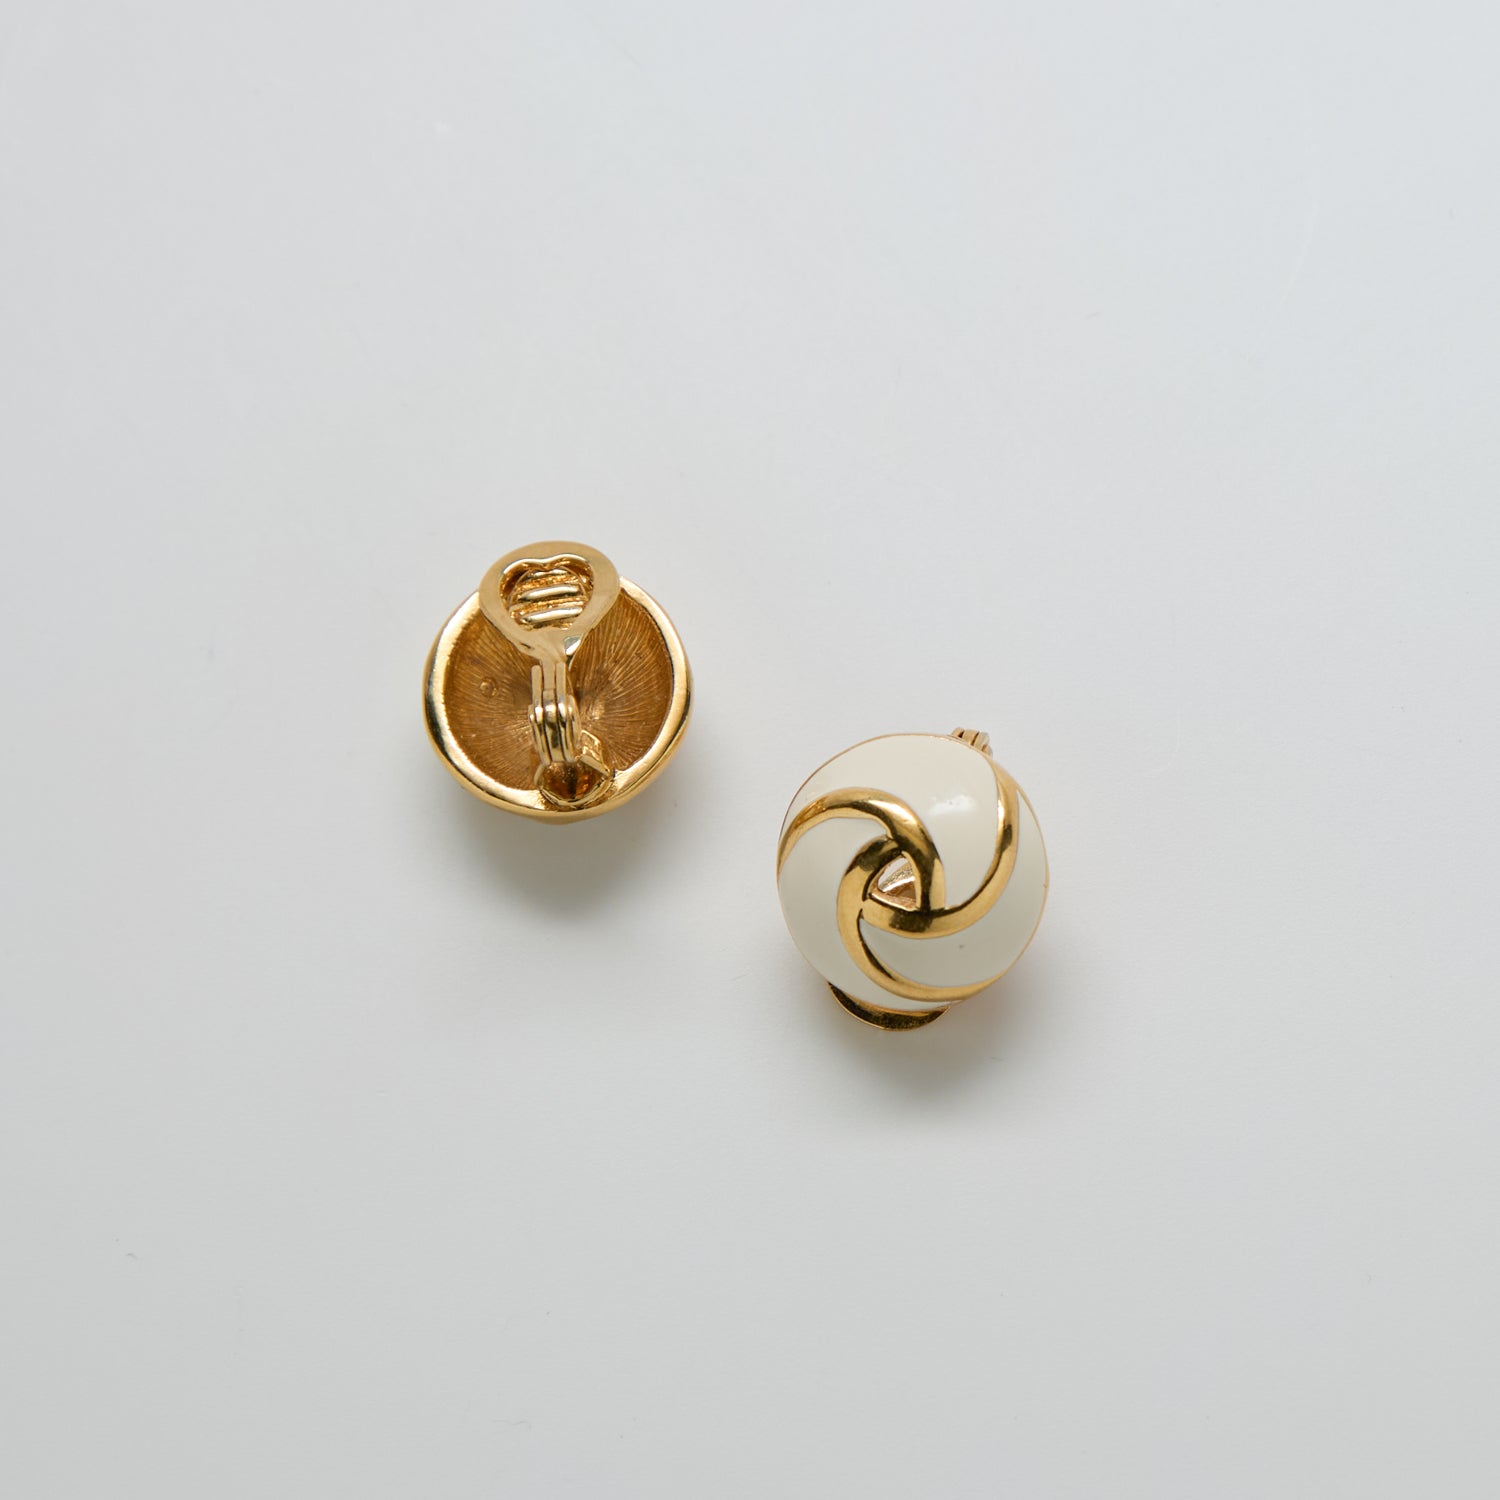 Vintage Gold and White Swirl Stud Earrings